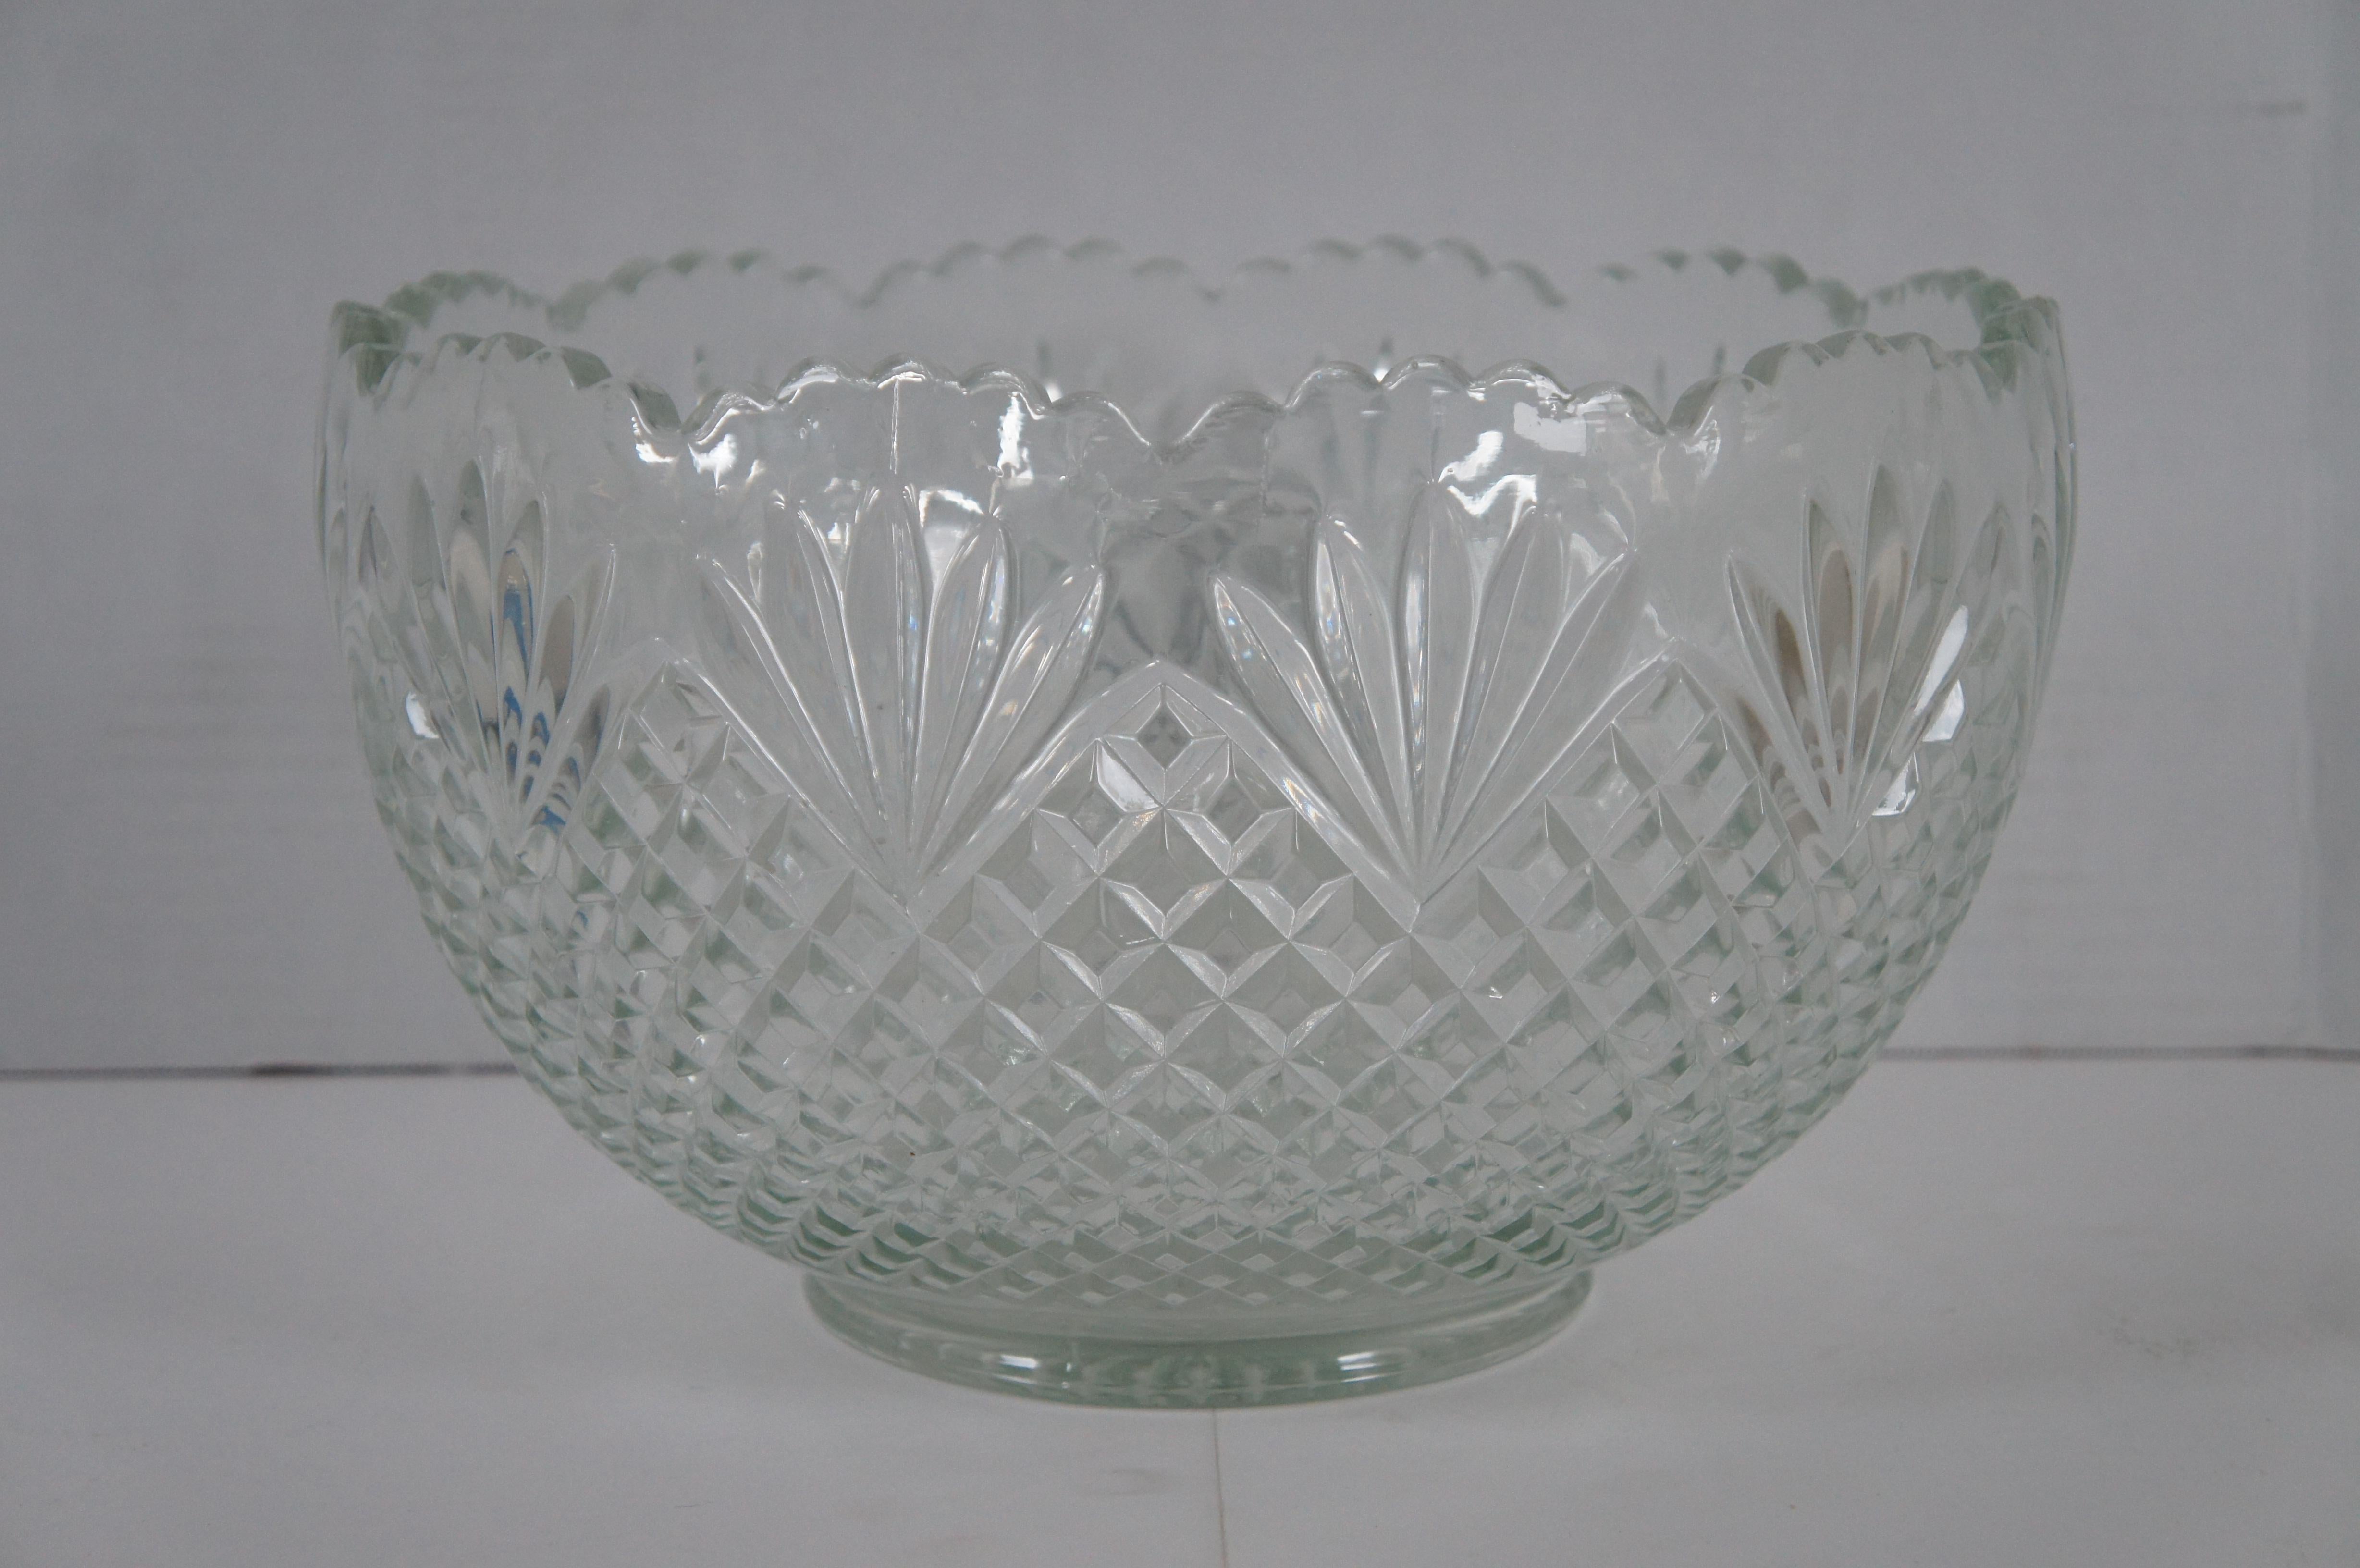 Antique 14 Pc LE Smith Glass Co Pineapple Fan Cut Punch Bowl Tray Cups Set In Good Condition For Sale In Dayton, OH